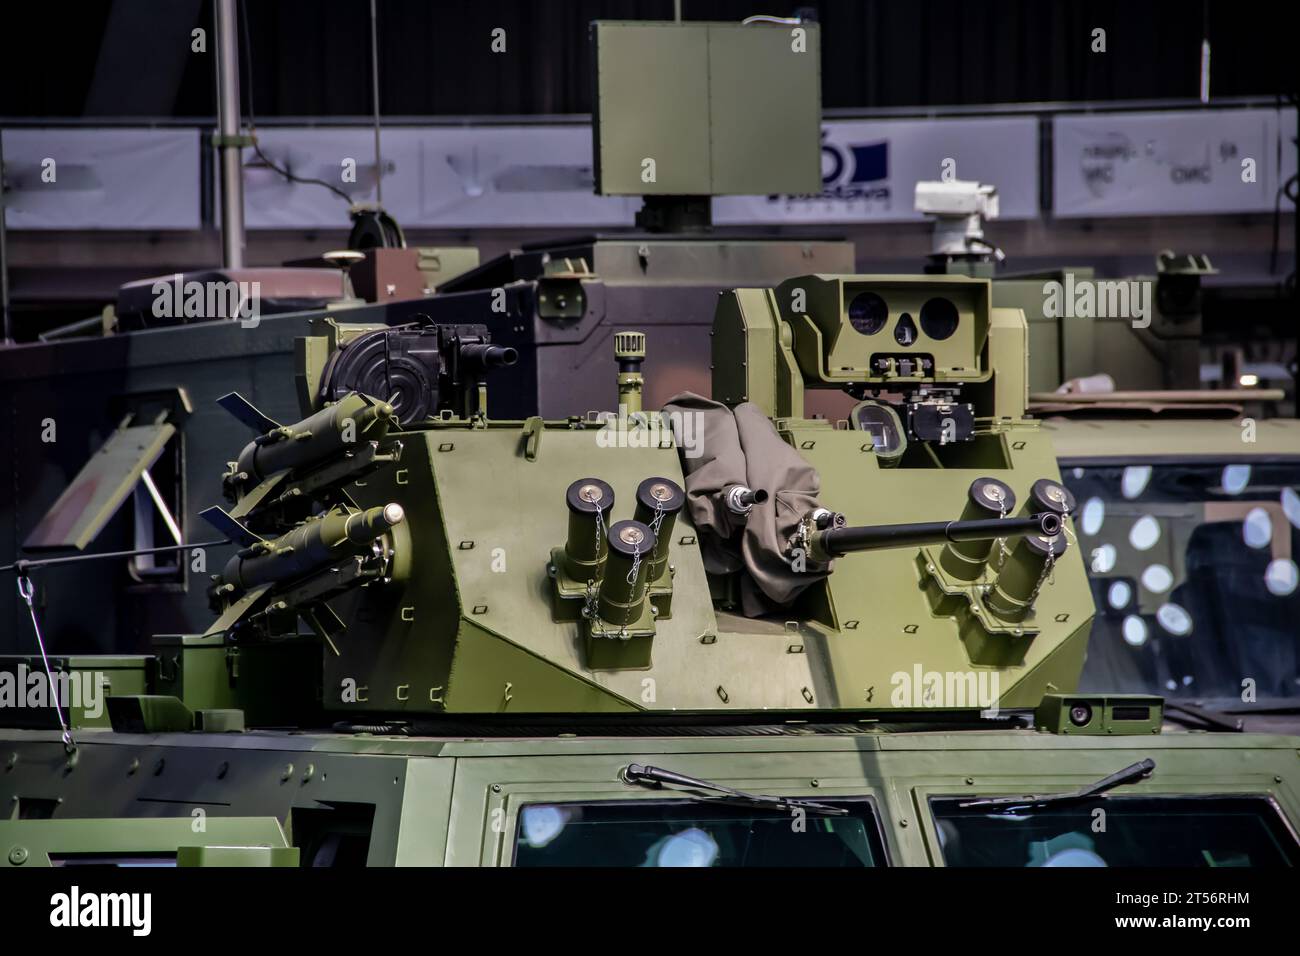 Armored combat vehicle painted in camouflage colors, armed with lethal machine gun and rocket launcher, at the international arms fair in Belgrade,SRB Stock Photo